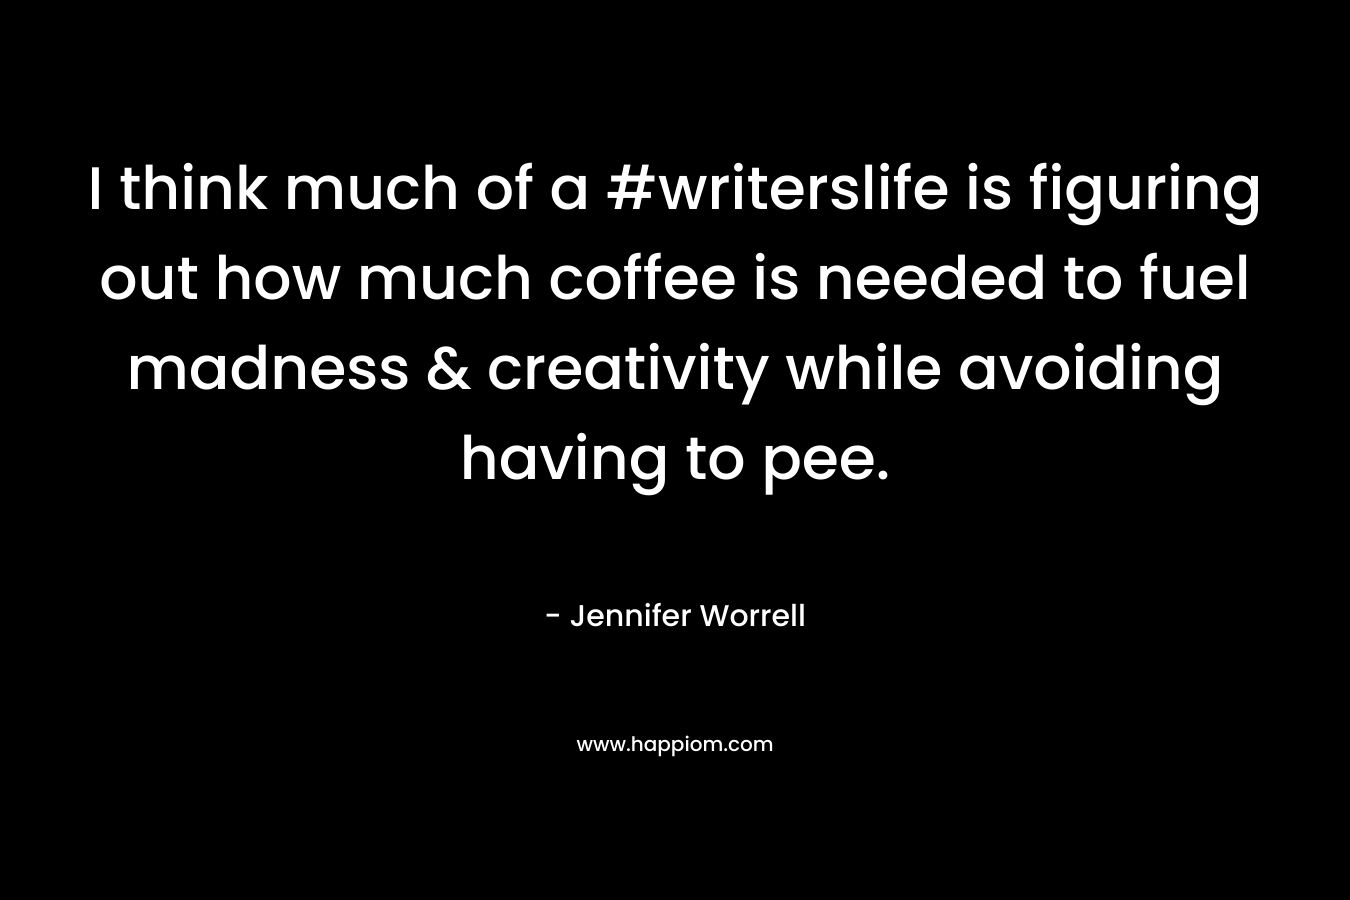 I think much of a #writerslife is figuring out how much coffee is needed to fuel madness & creativity while avoiding having to pee.